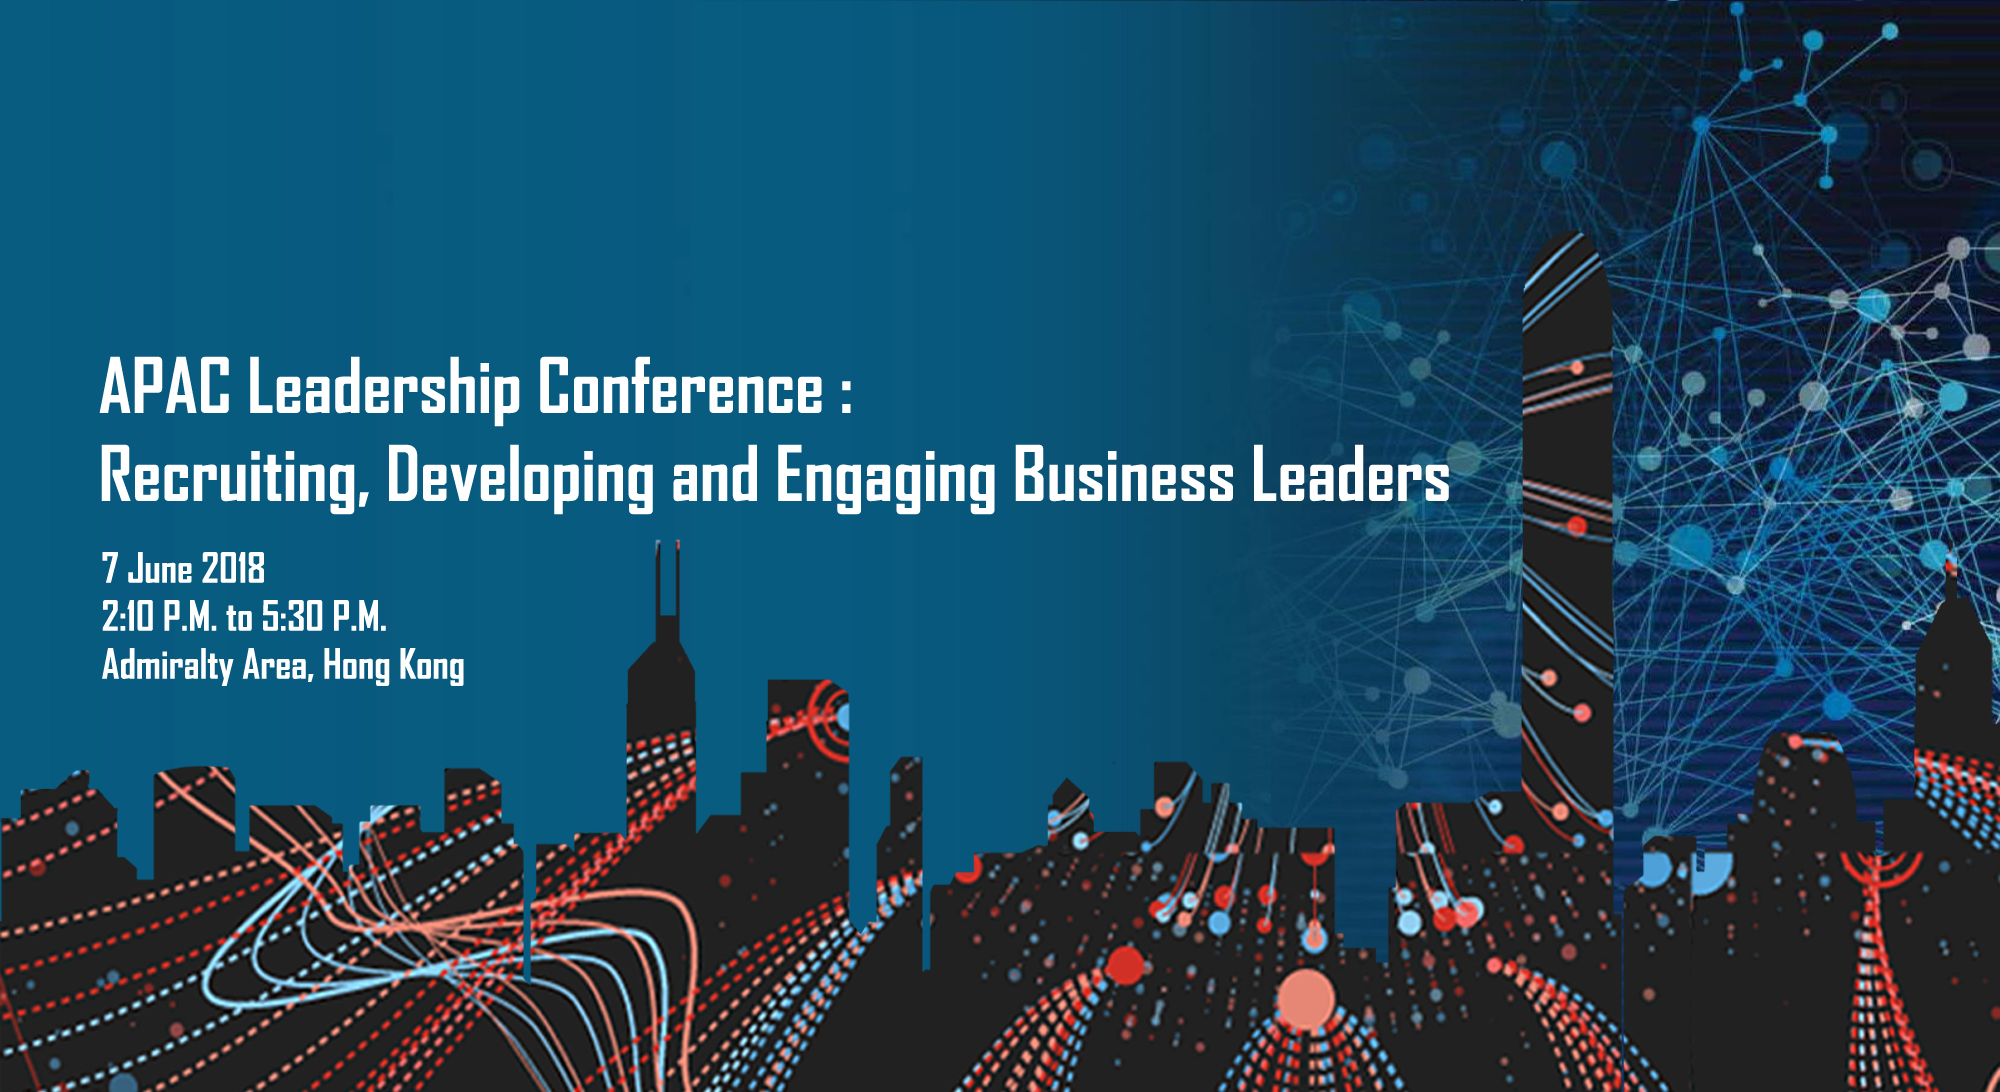 APAC Leadership Conference : Recruiting, Developing and Engaging Business Leaders